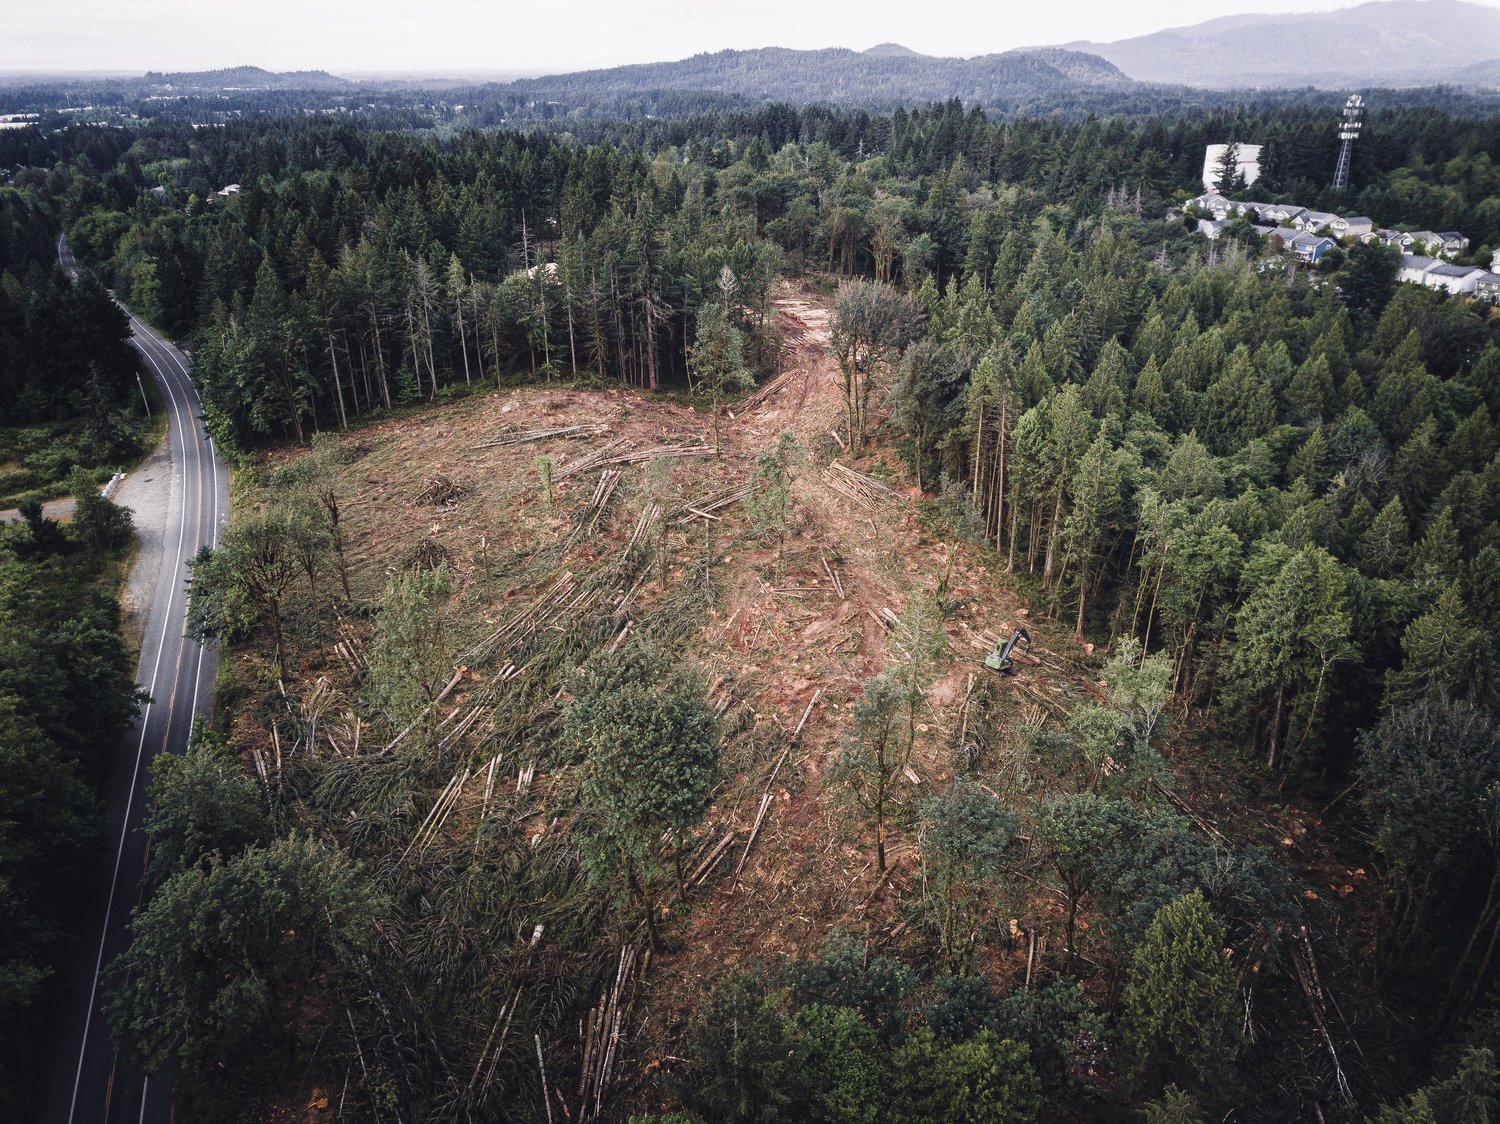 A dramatic view of the clearcut forest showing the bare hills of Green Cove Creek Watershed from a drone photo.